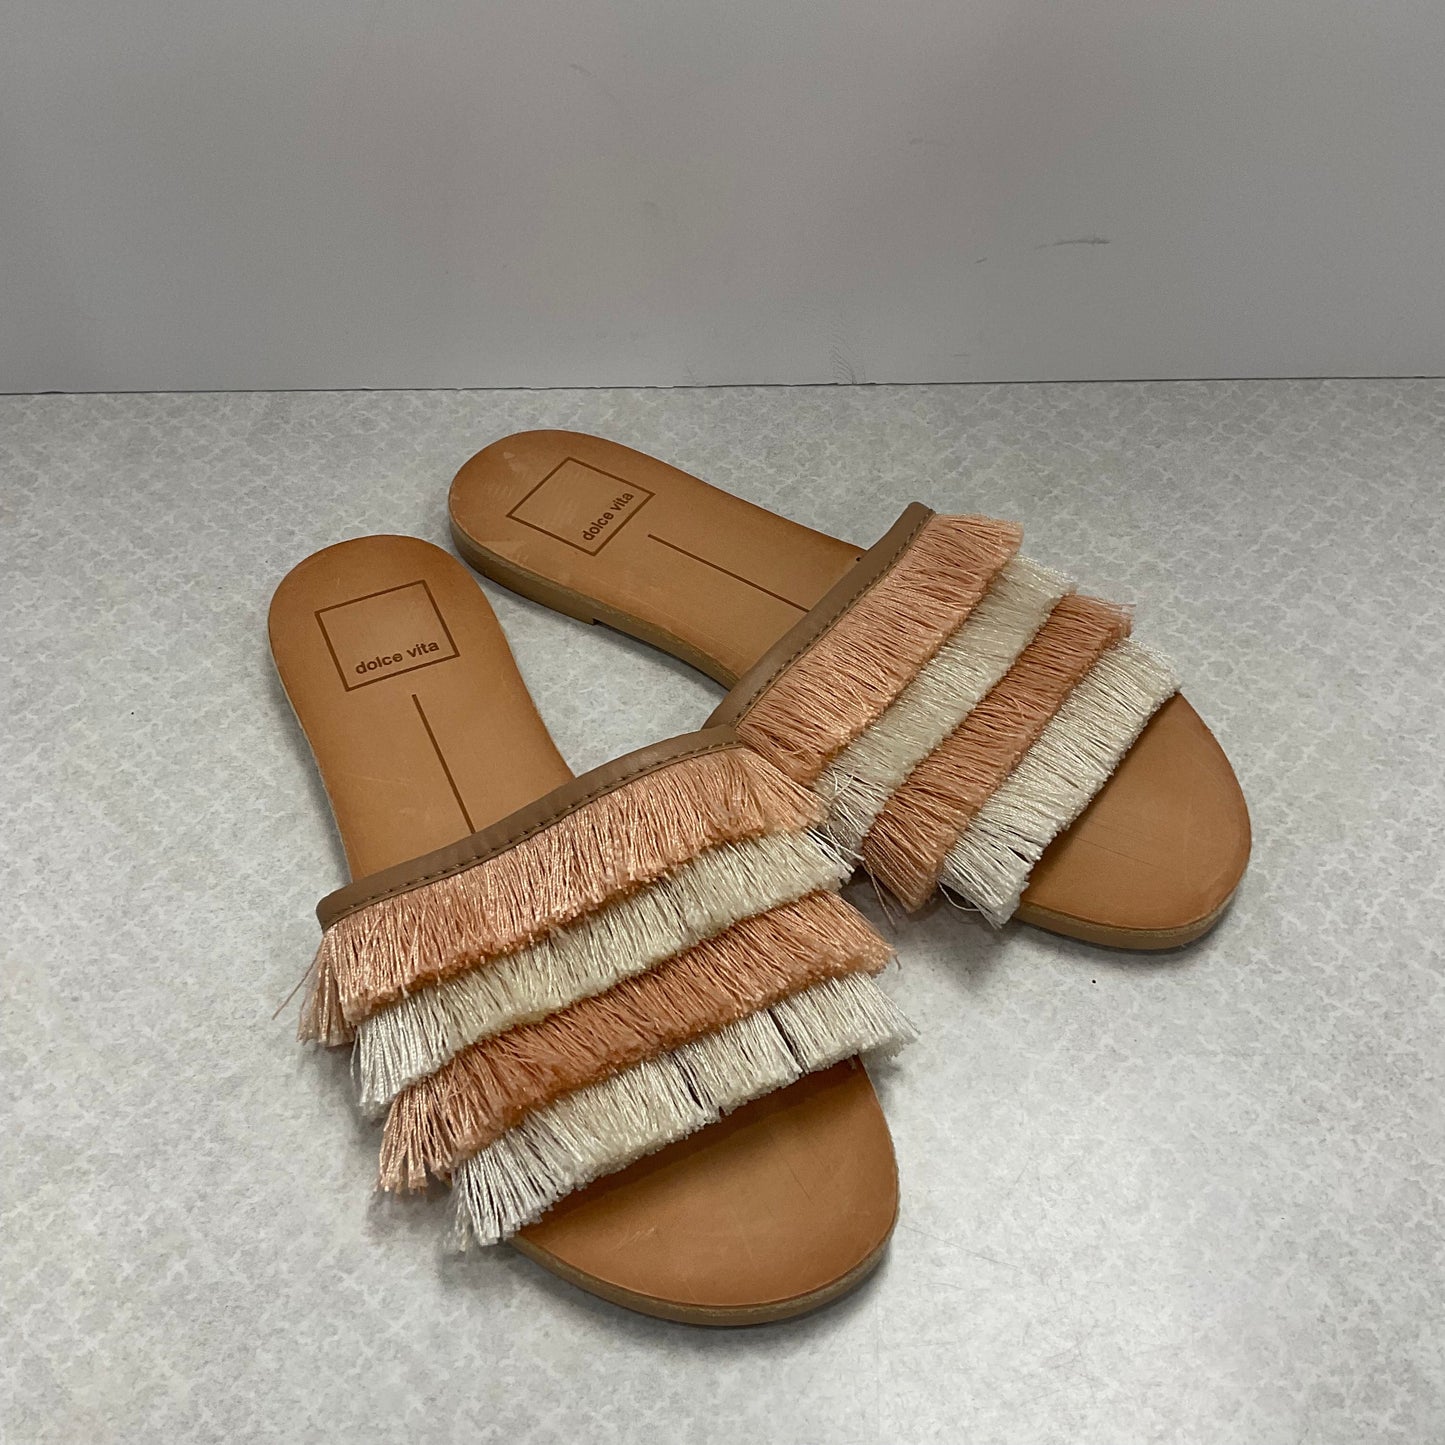 Sandals Flats By Dolce Vita  Size: 6.5